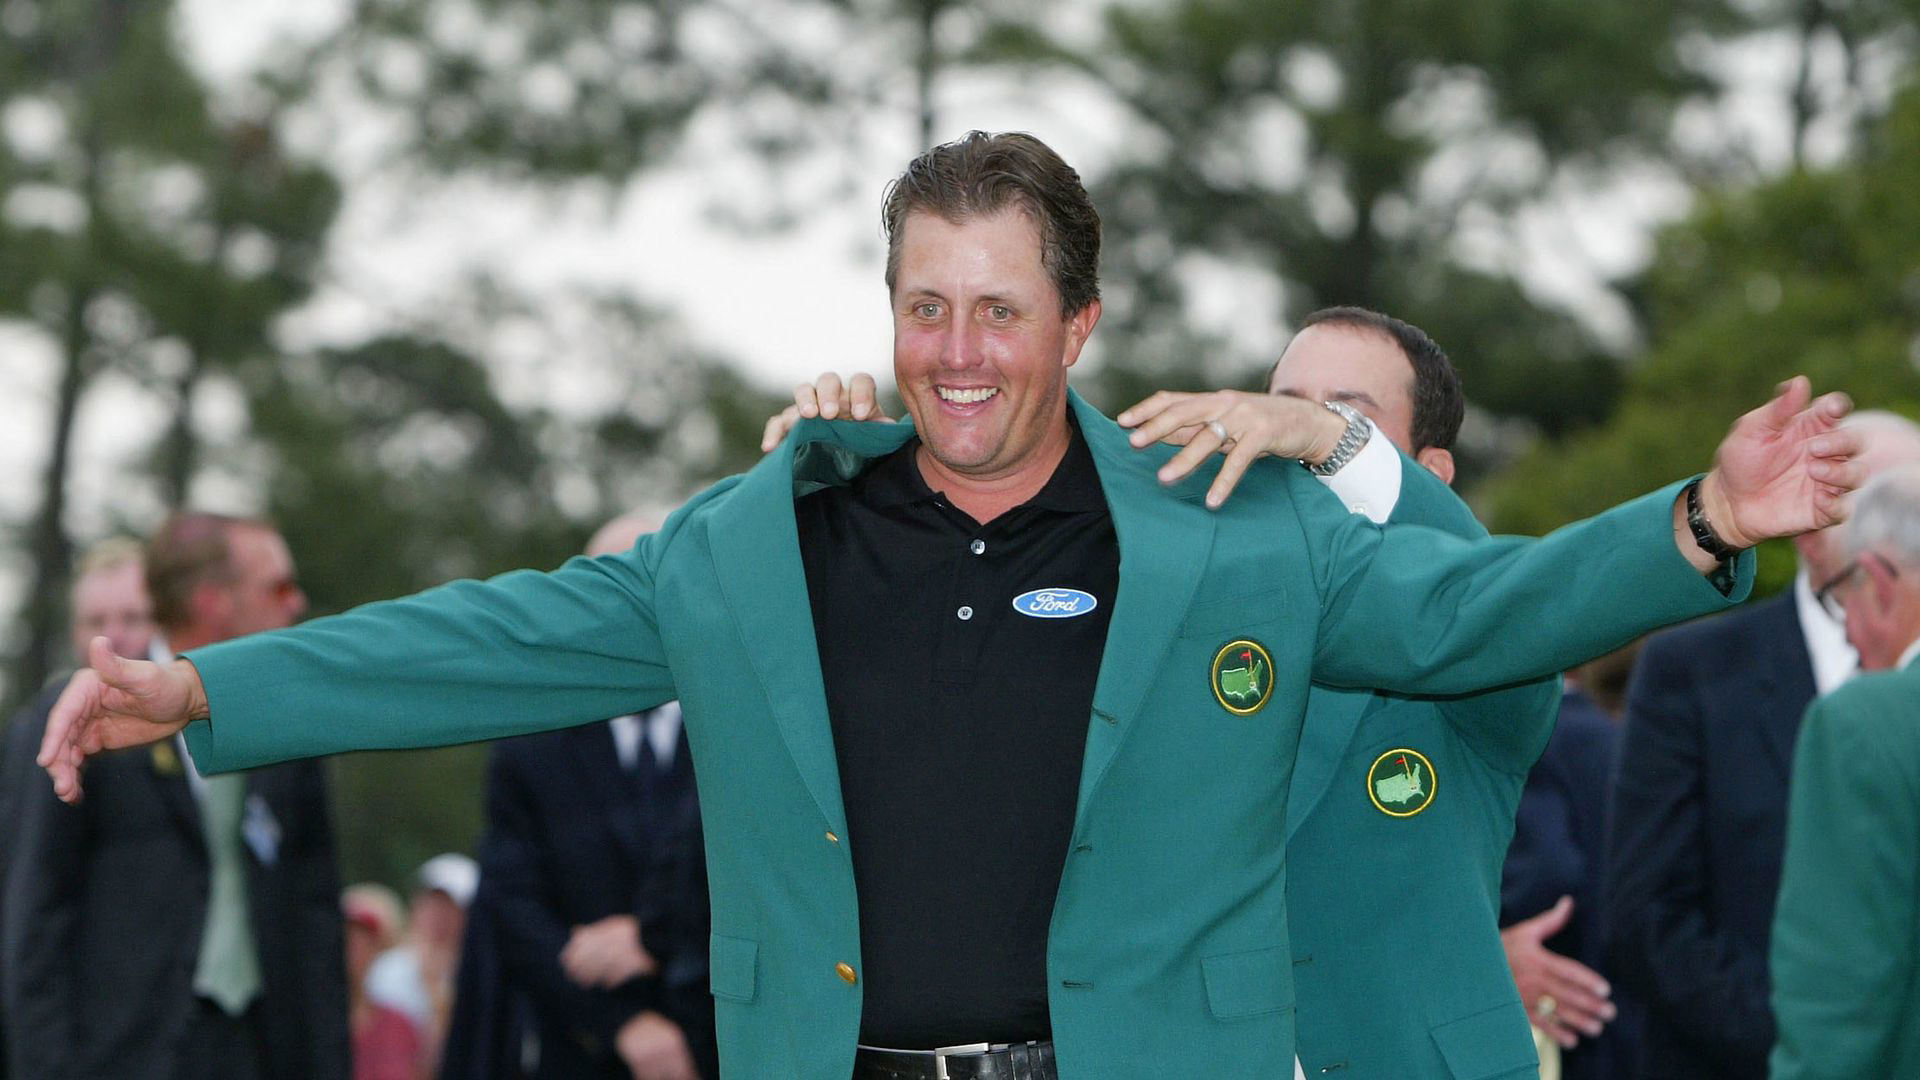 Phil Mickelson shares comically insane ‘sign stealing’ story at the Masters